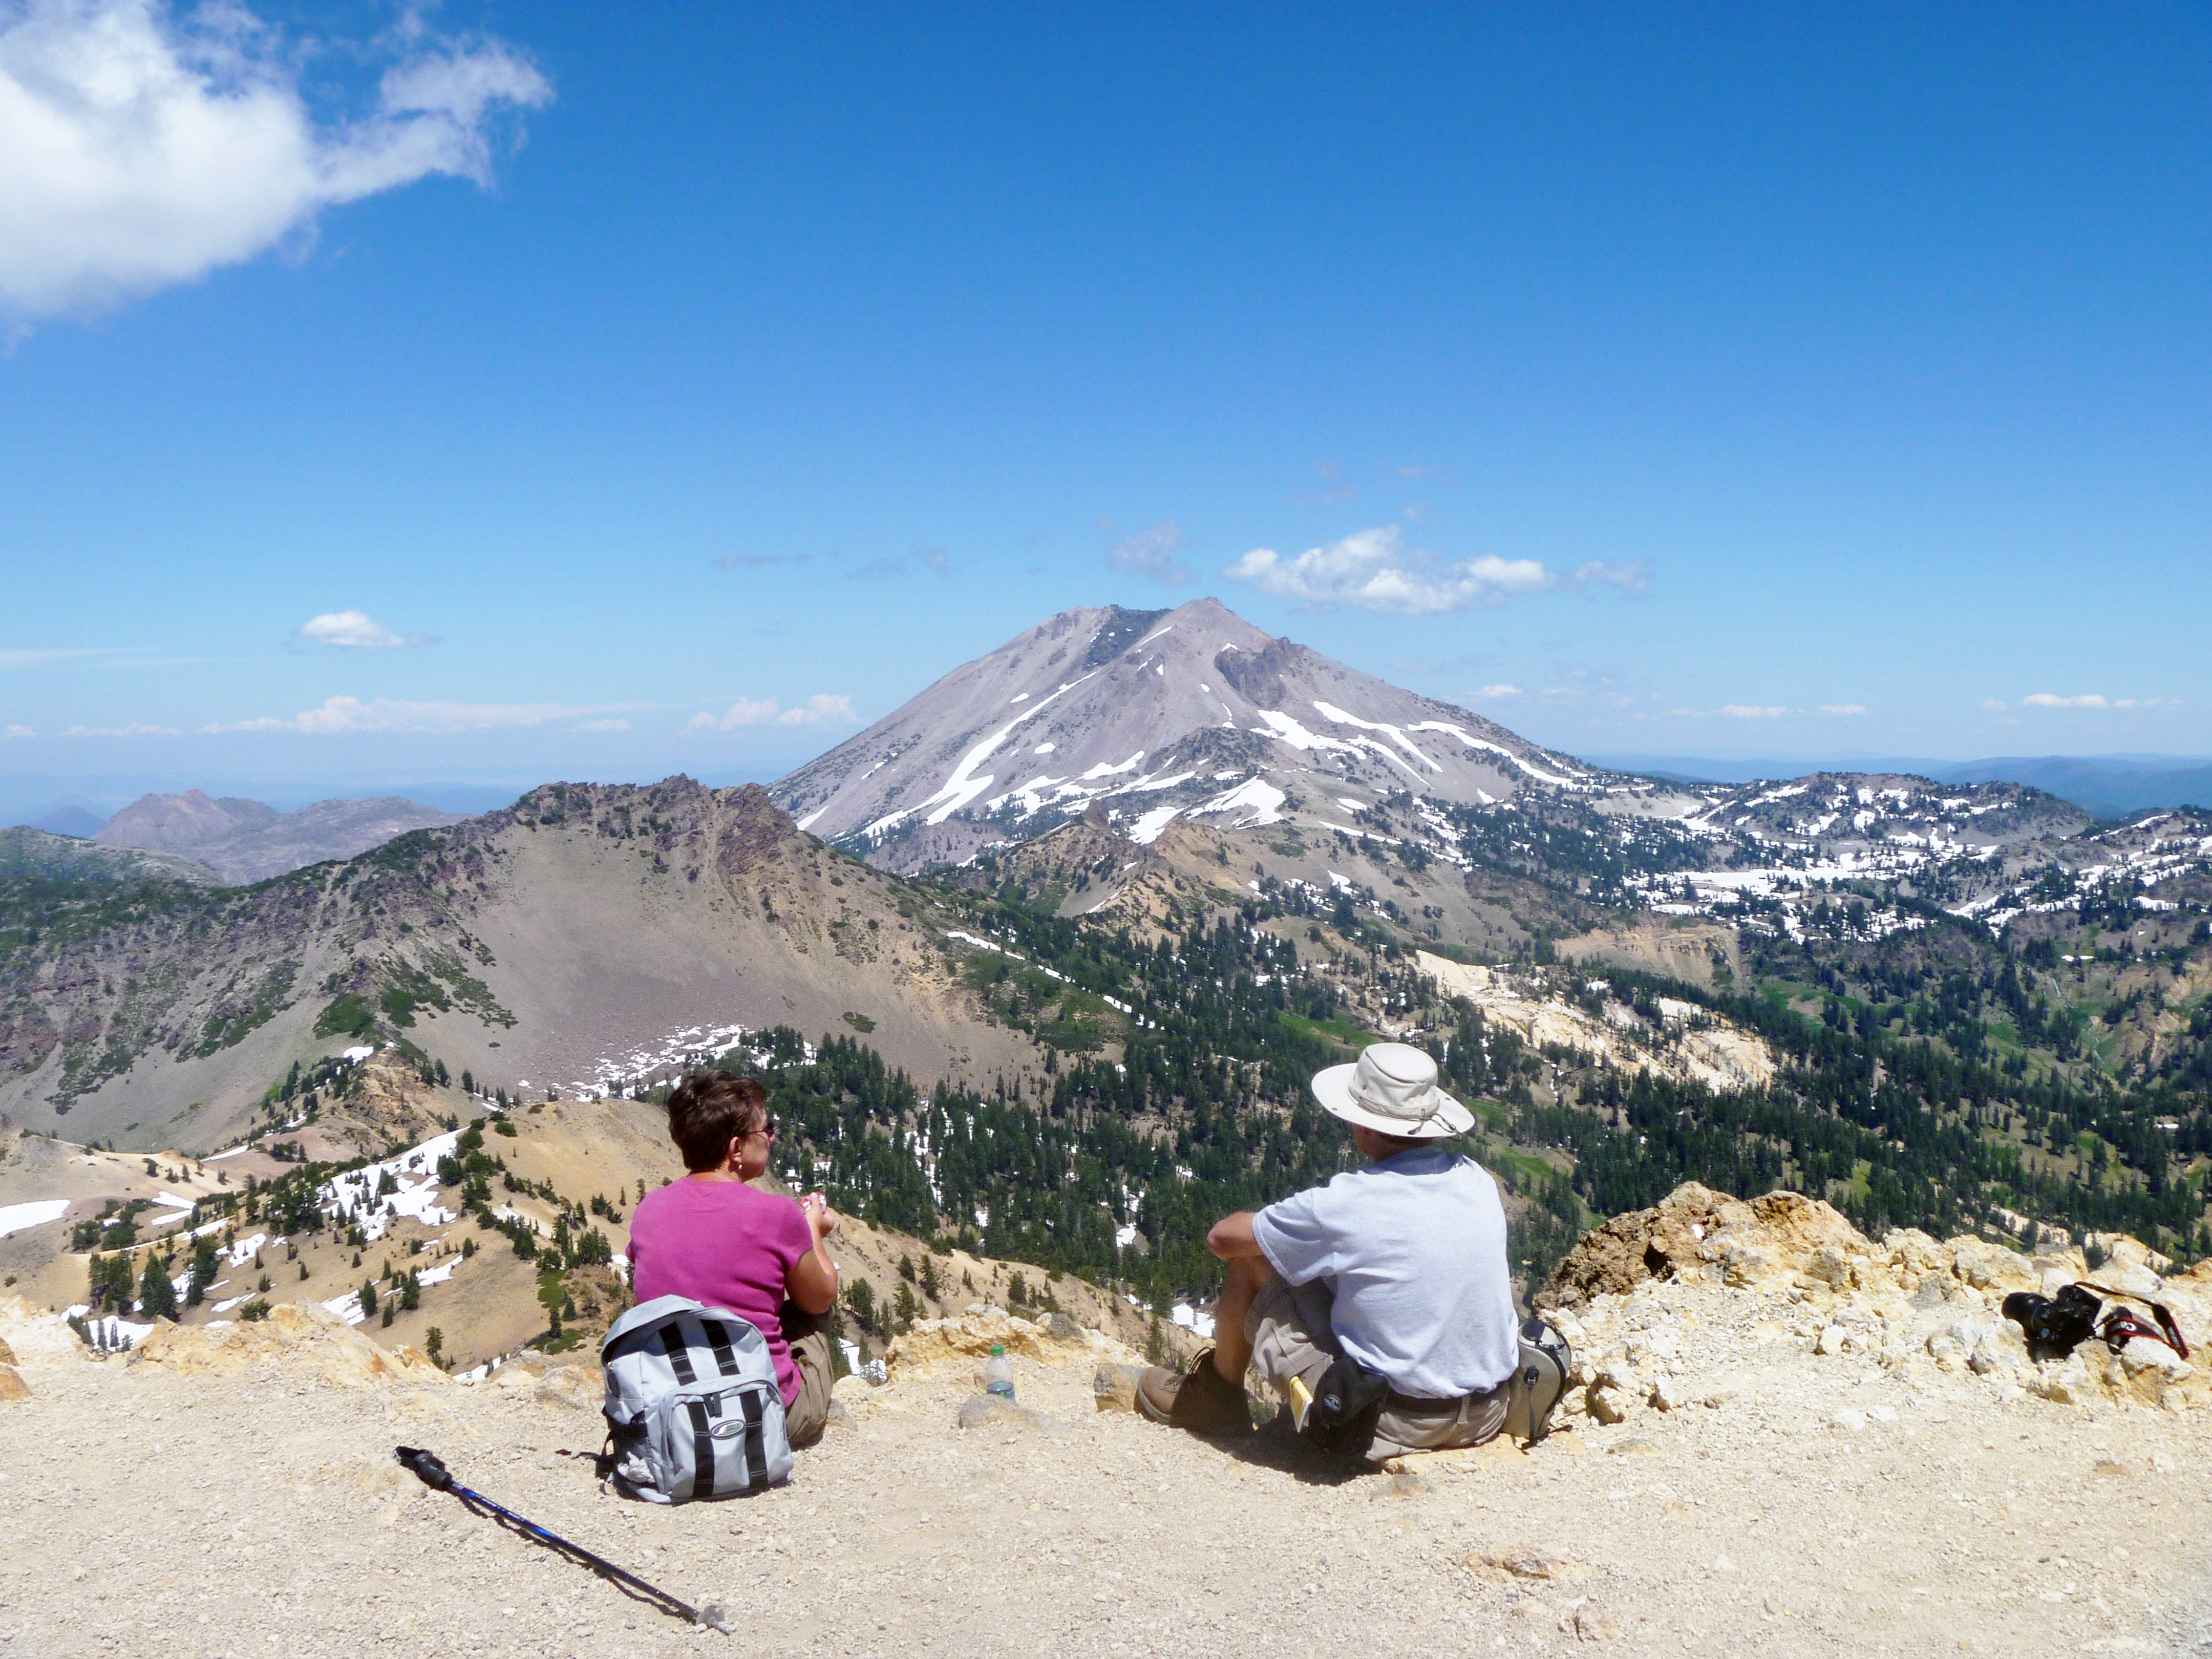 Two hikers sit on a mountain top with a view of multiple peaks, dotted with patches of snow